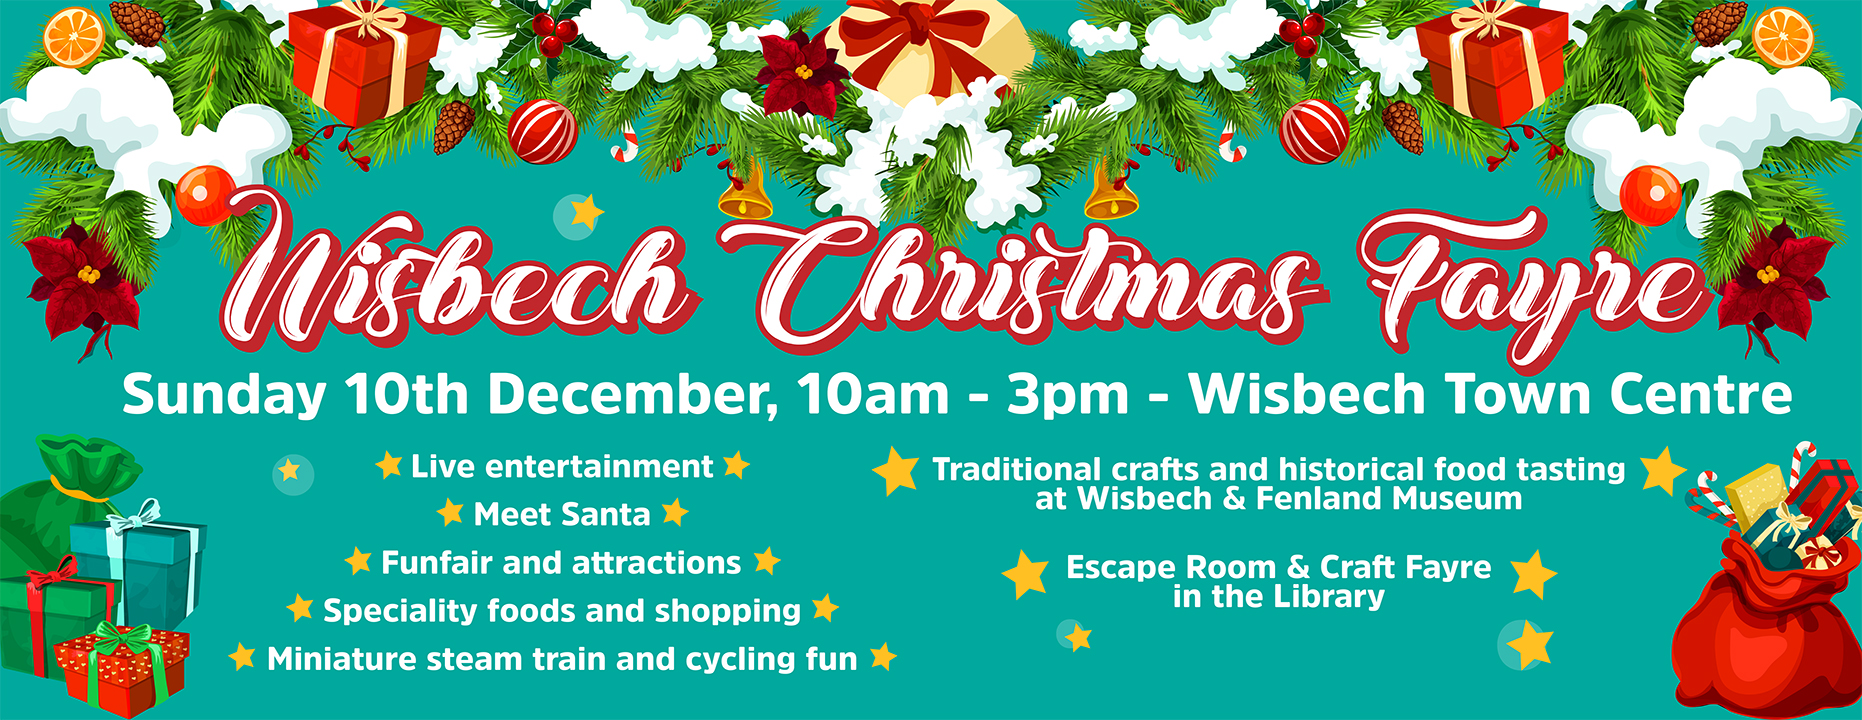 Graphic for Wisbech Christmas Fayre - Sunday 10th December, 10am to 3pm